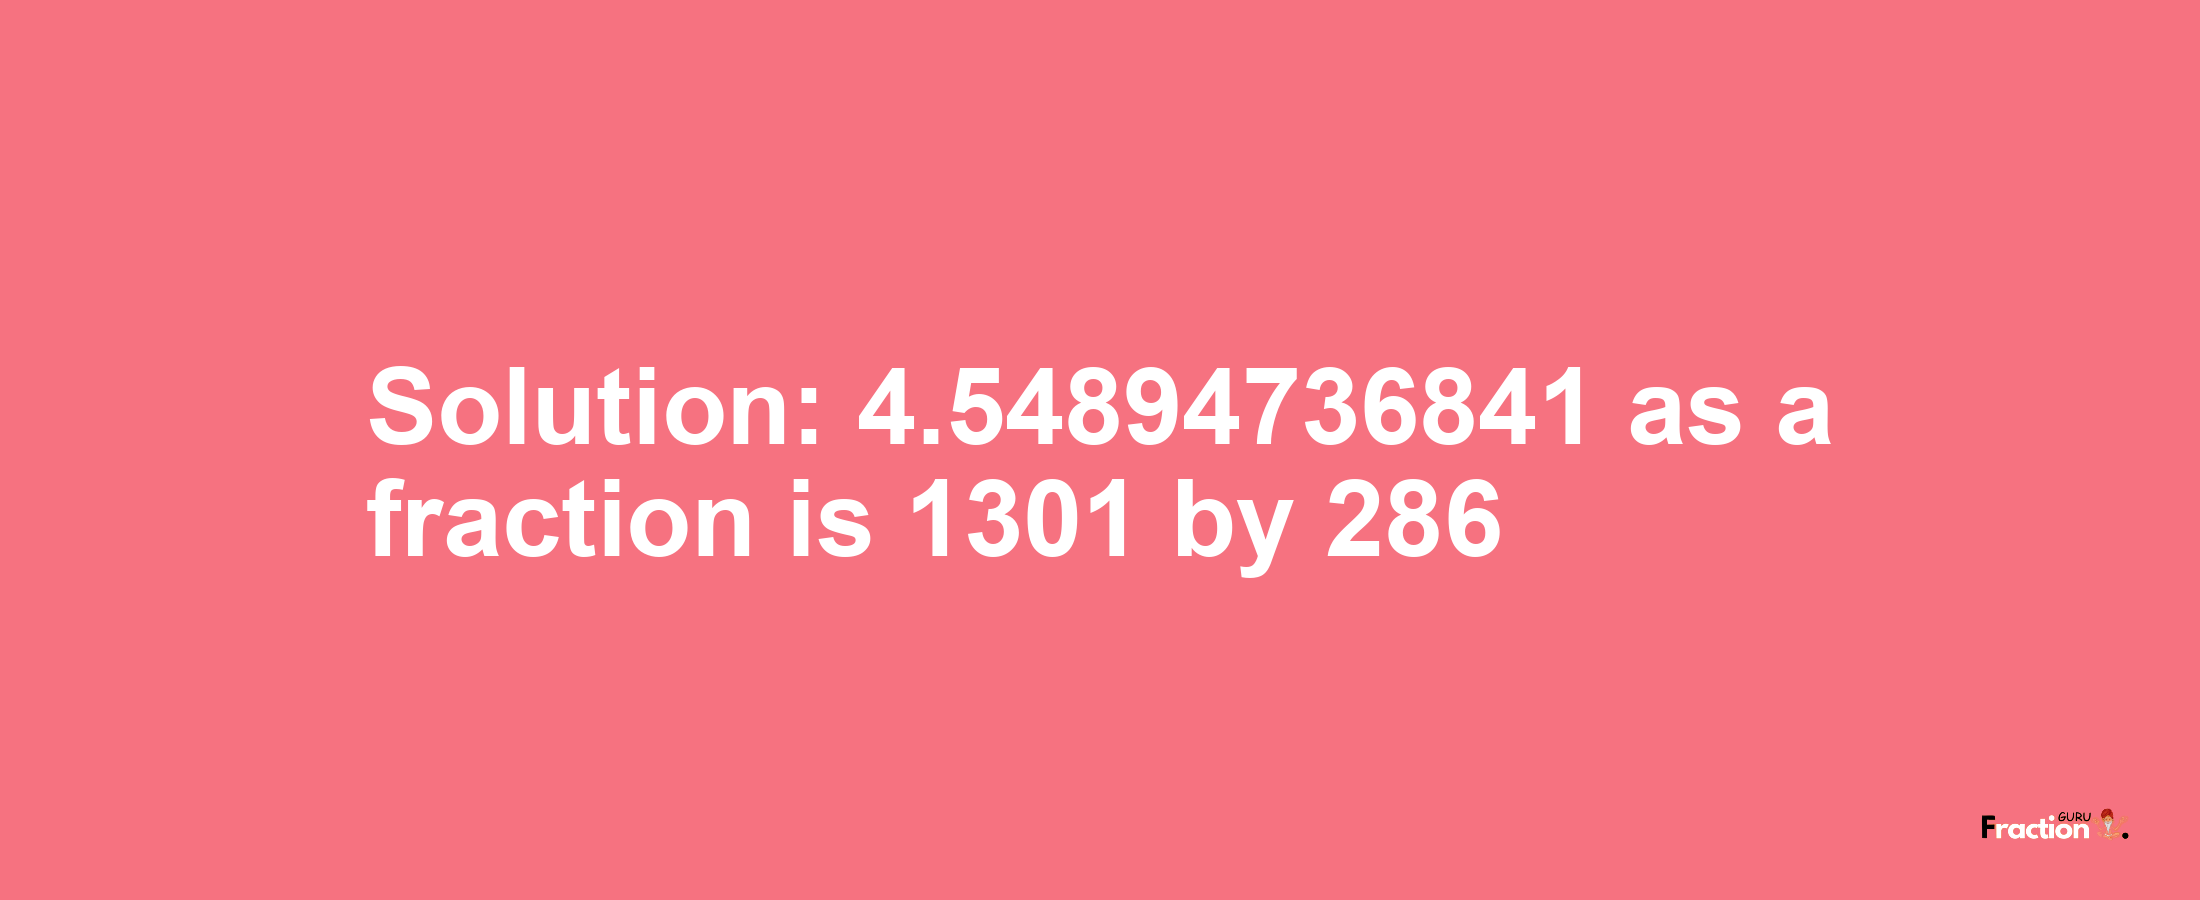 Solution:4.54894736841 as a fraction is 1301/286